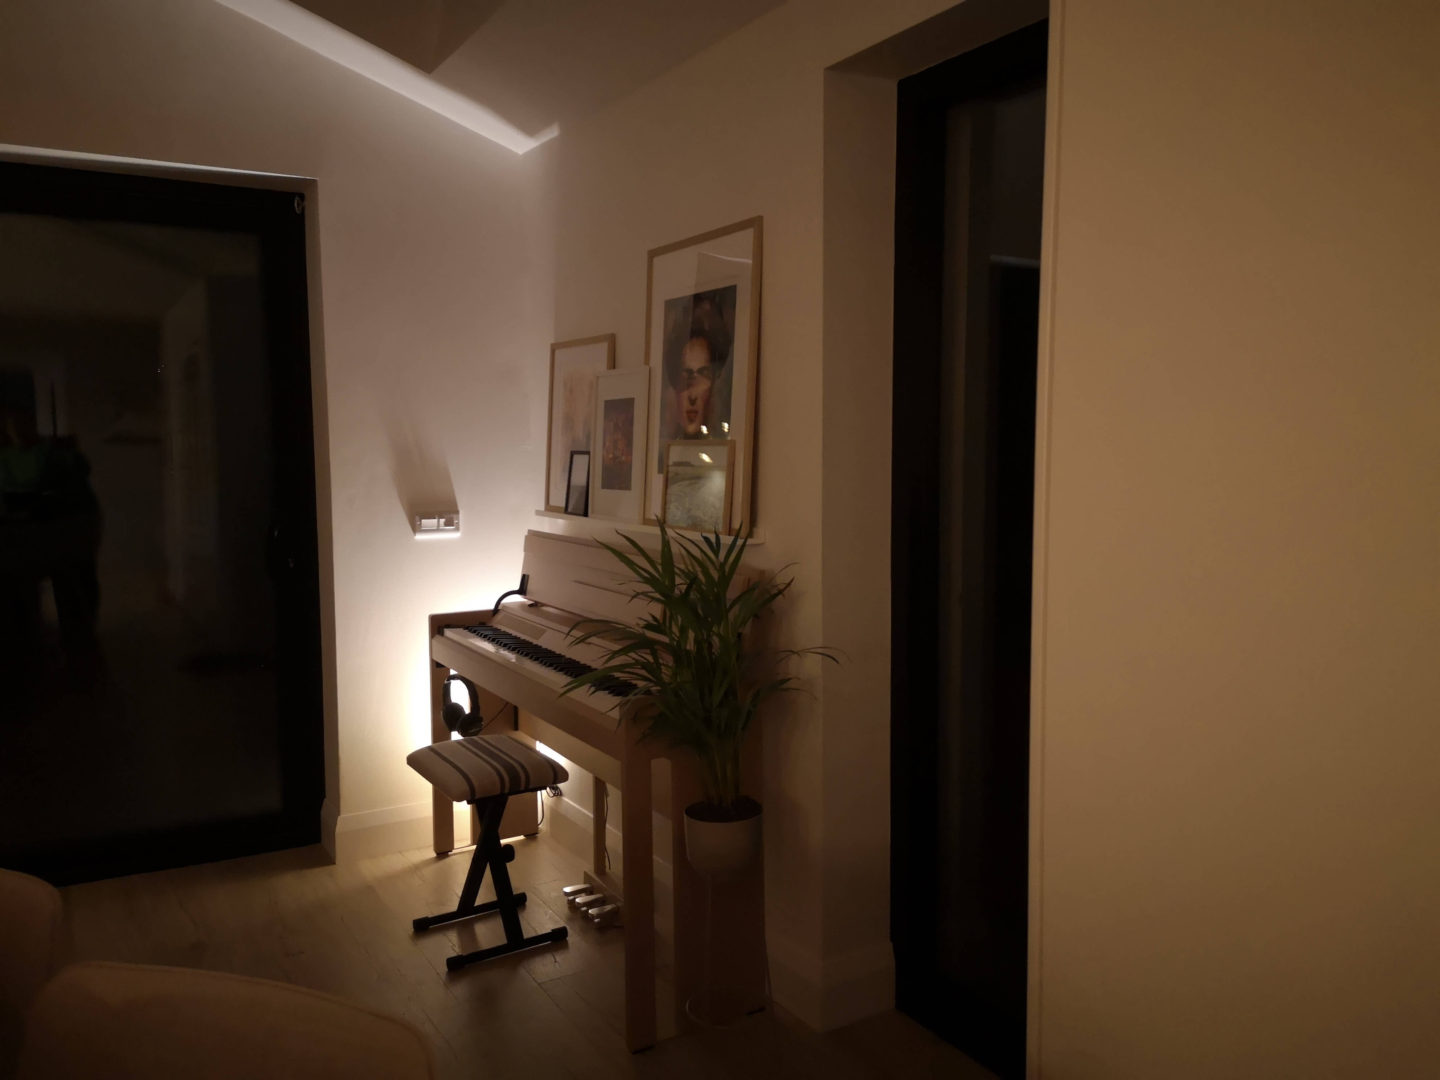 The piano corner at night with the uplighter behind it.